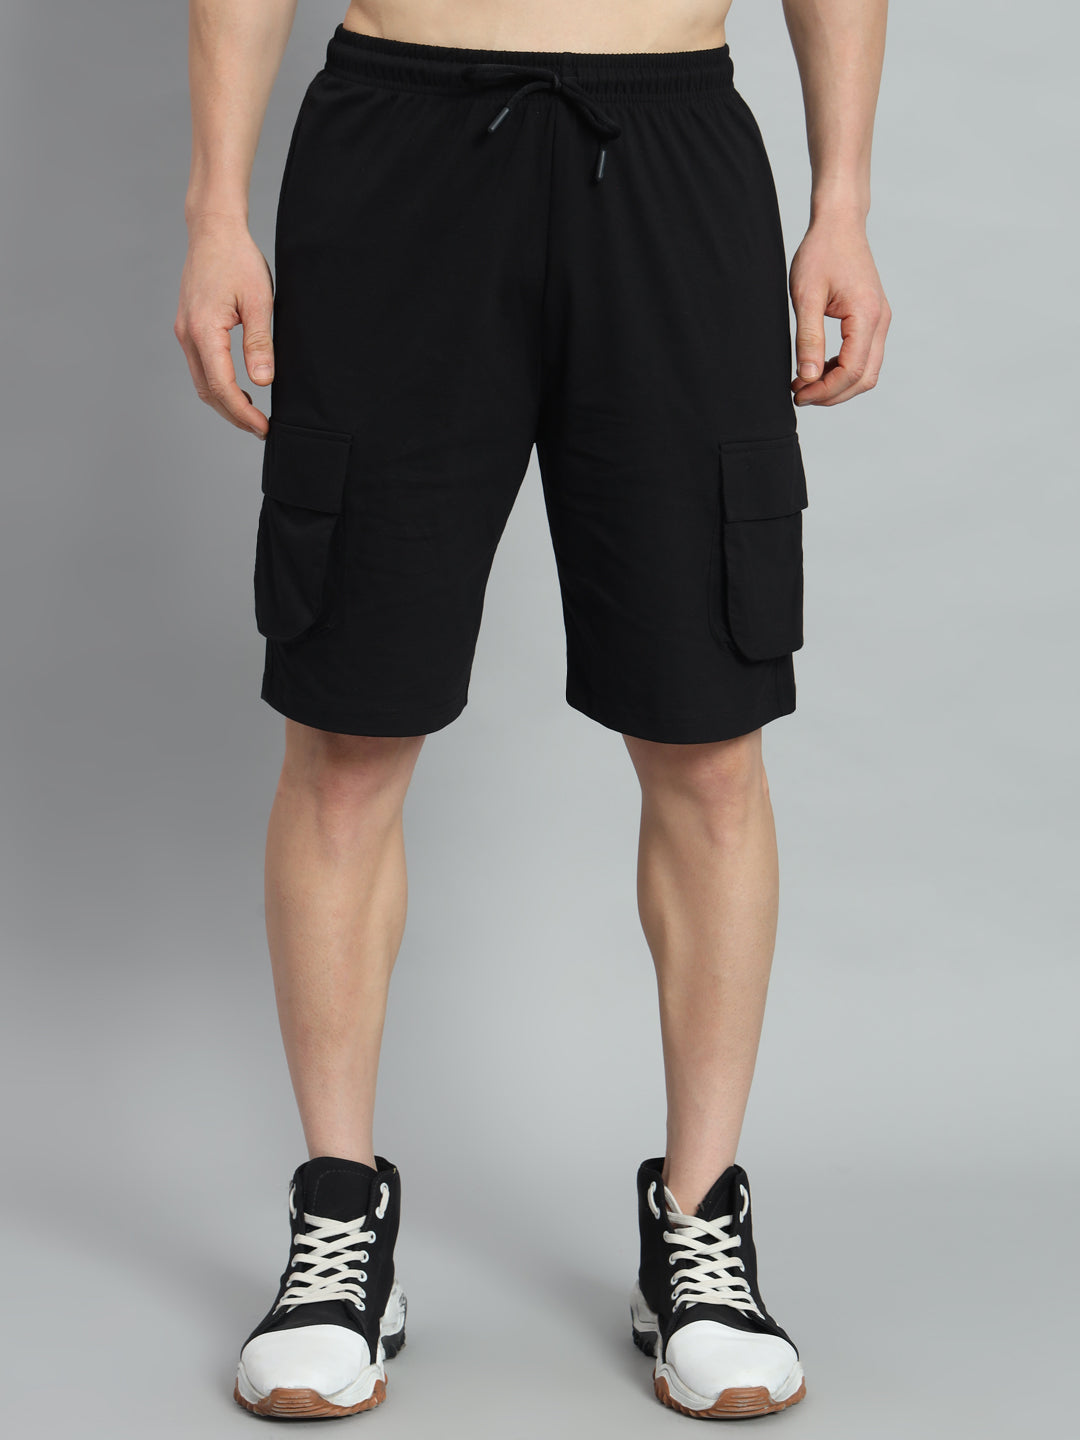 GRIFFEL T-shirt and Shorts Set